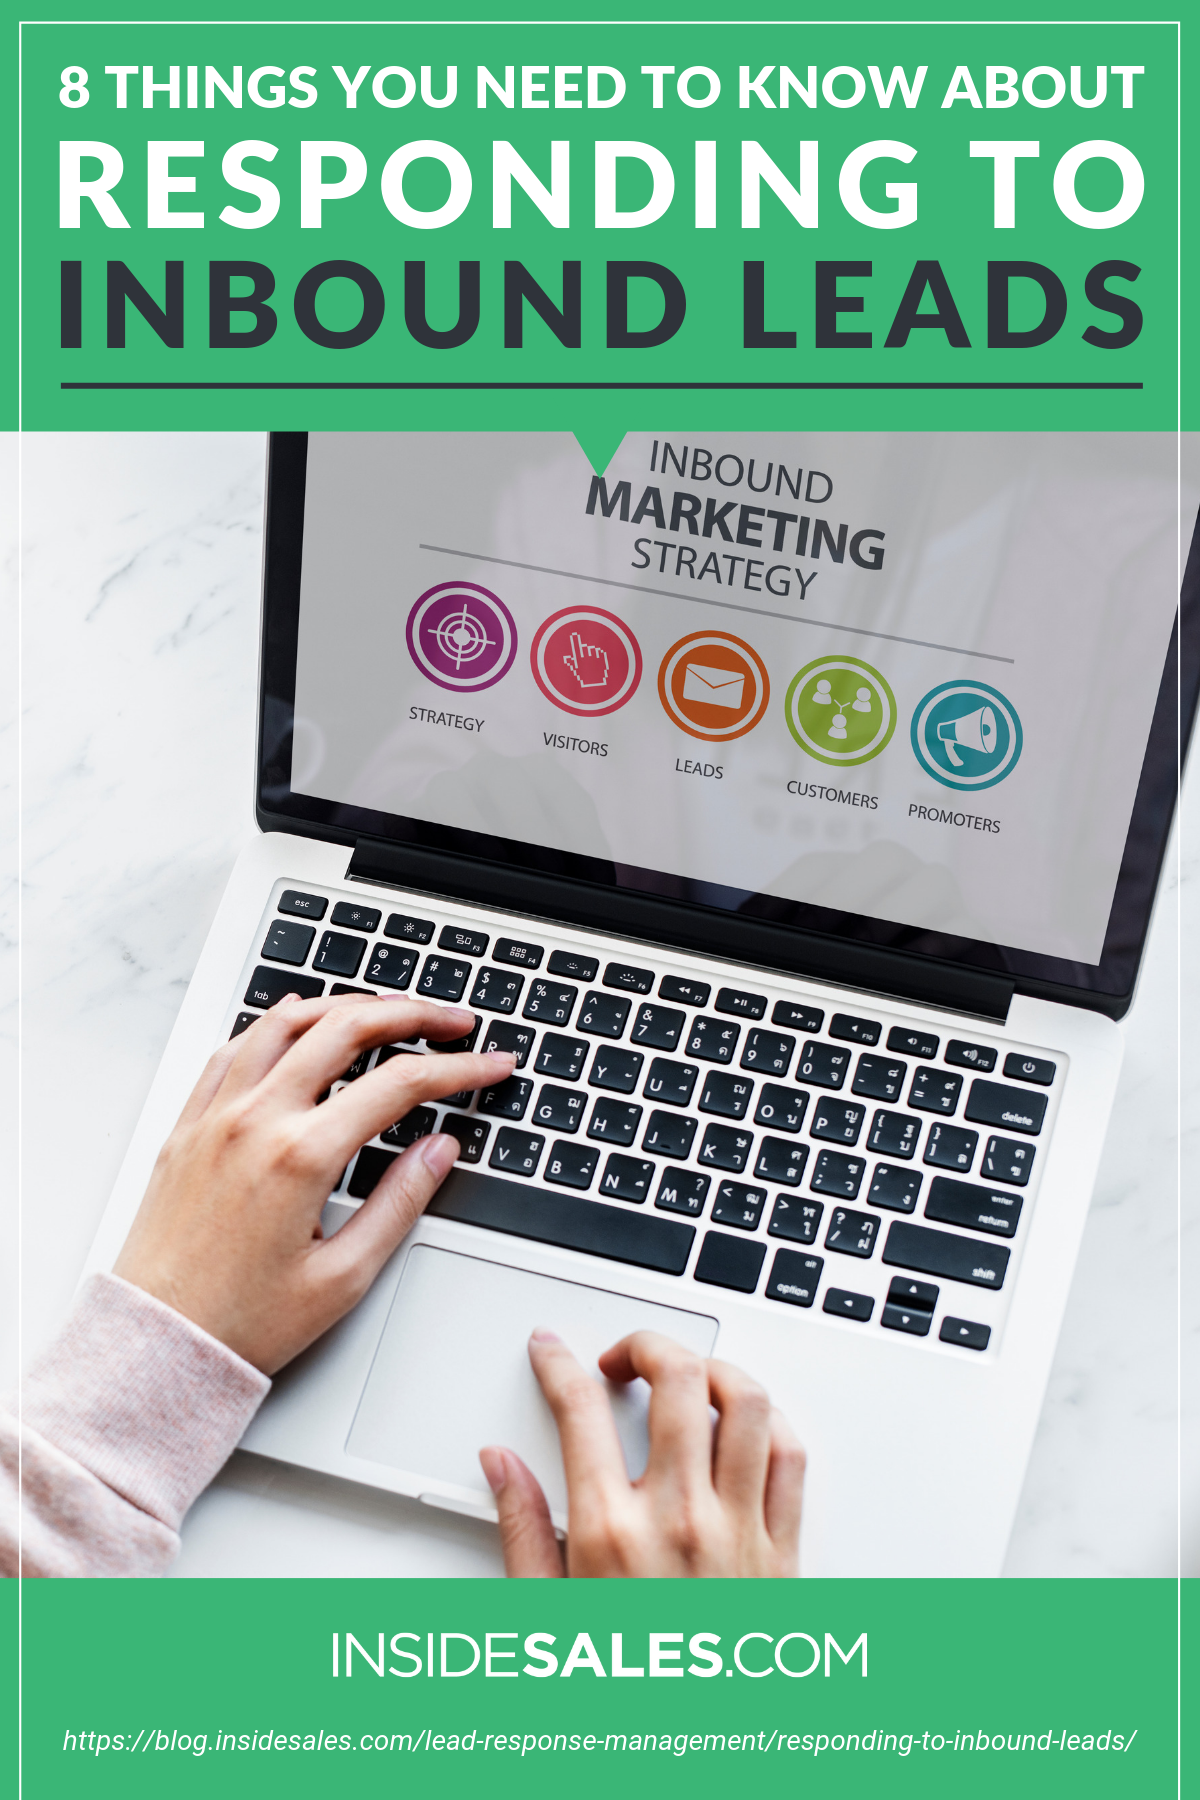 8 Things You Need To Know About Responding To Inbound Leads https://www.insidesales.com/blog/lead-response-management/responding-to-inbound-leads/